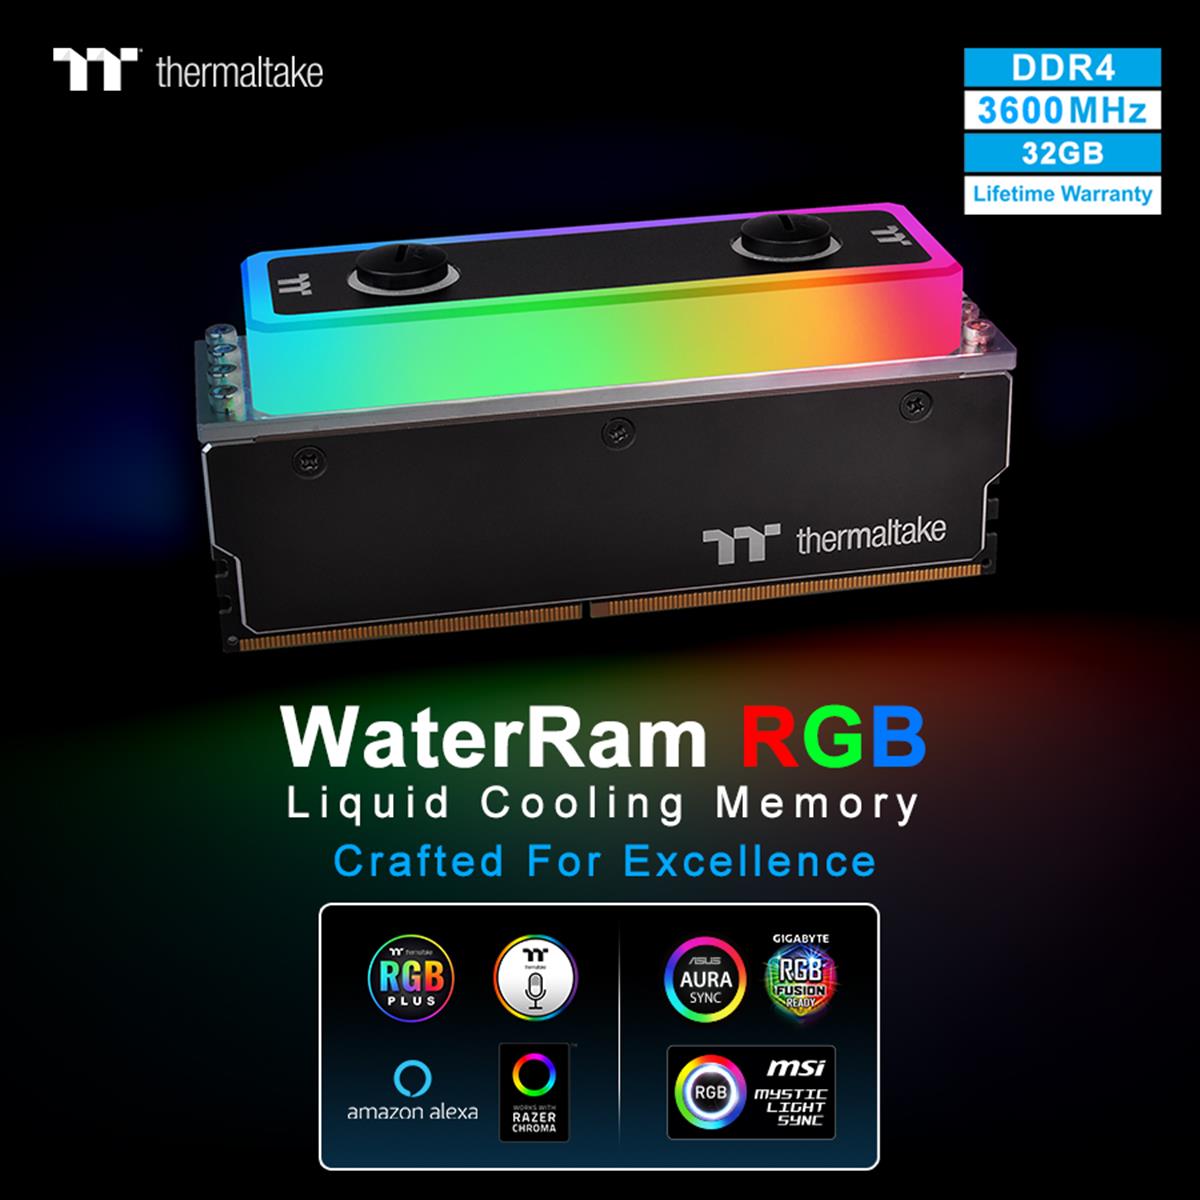 Thermaltake Launches WaterRam RGB Liquid Cooling DDR4 Memory 3600MHz 32GB 2 Copy